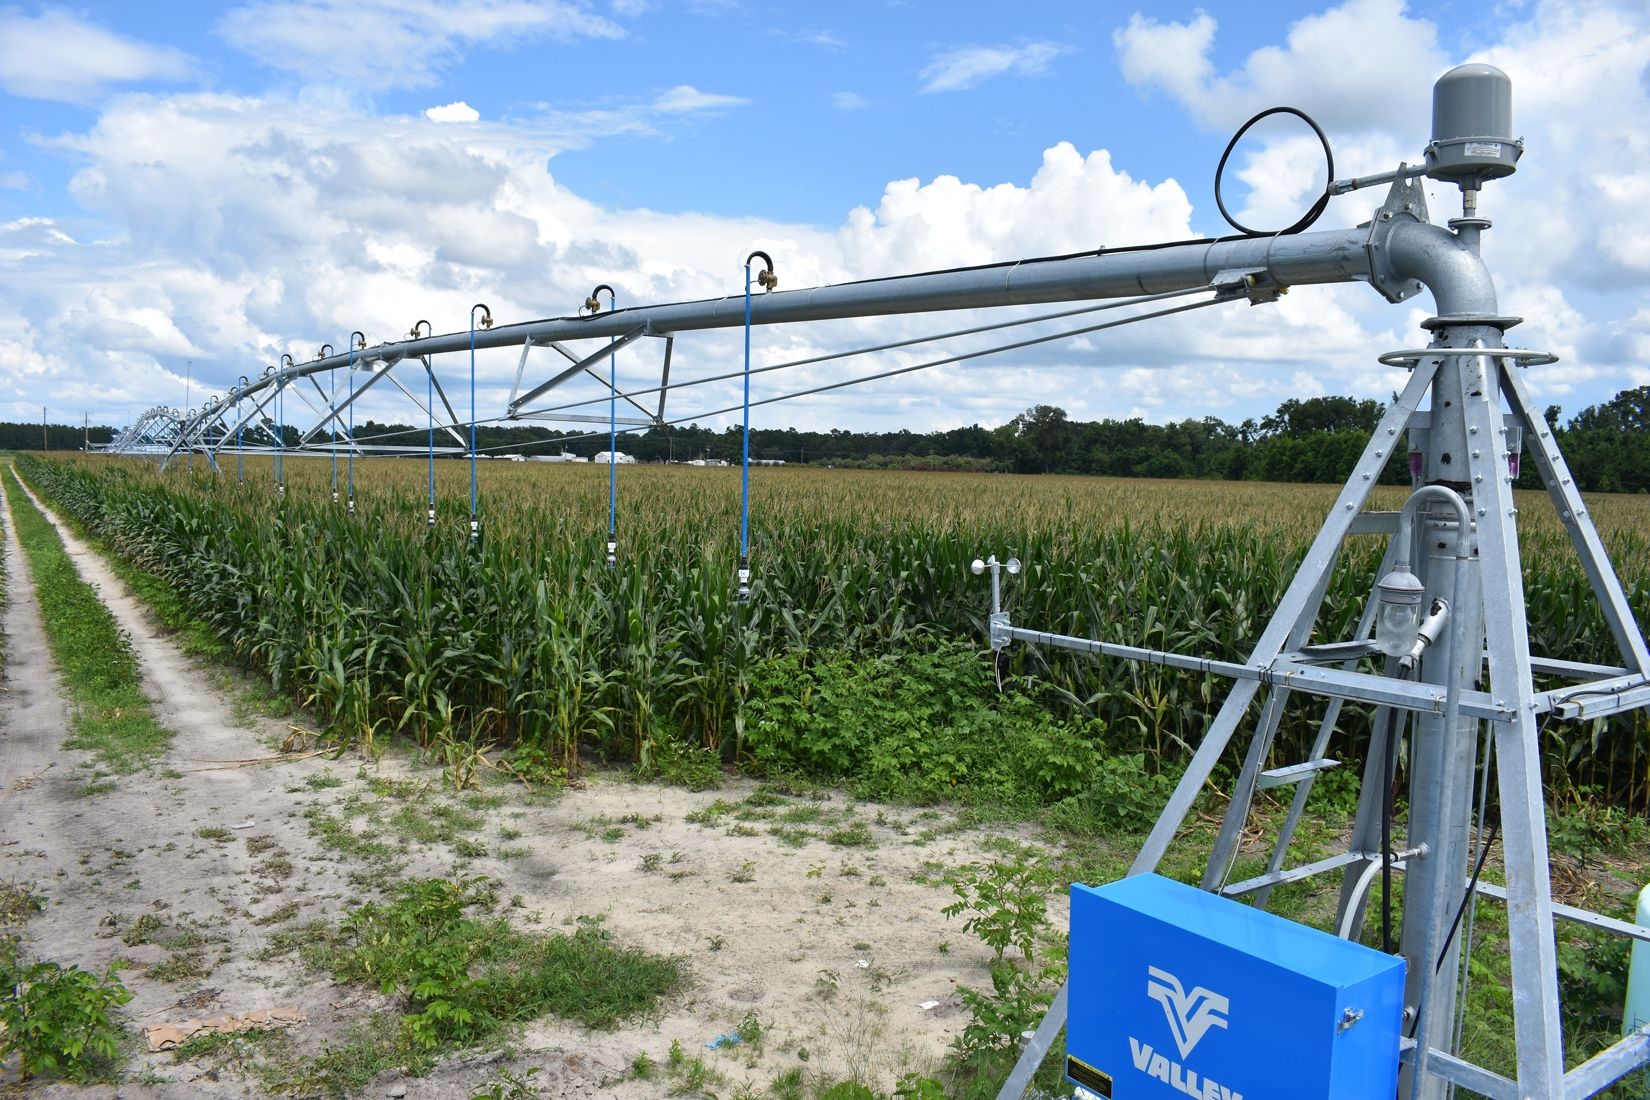 Center pivot irrigation system with low pressure drop nozzles increase crop water uptake efficiency. 